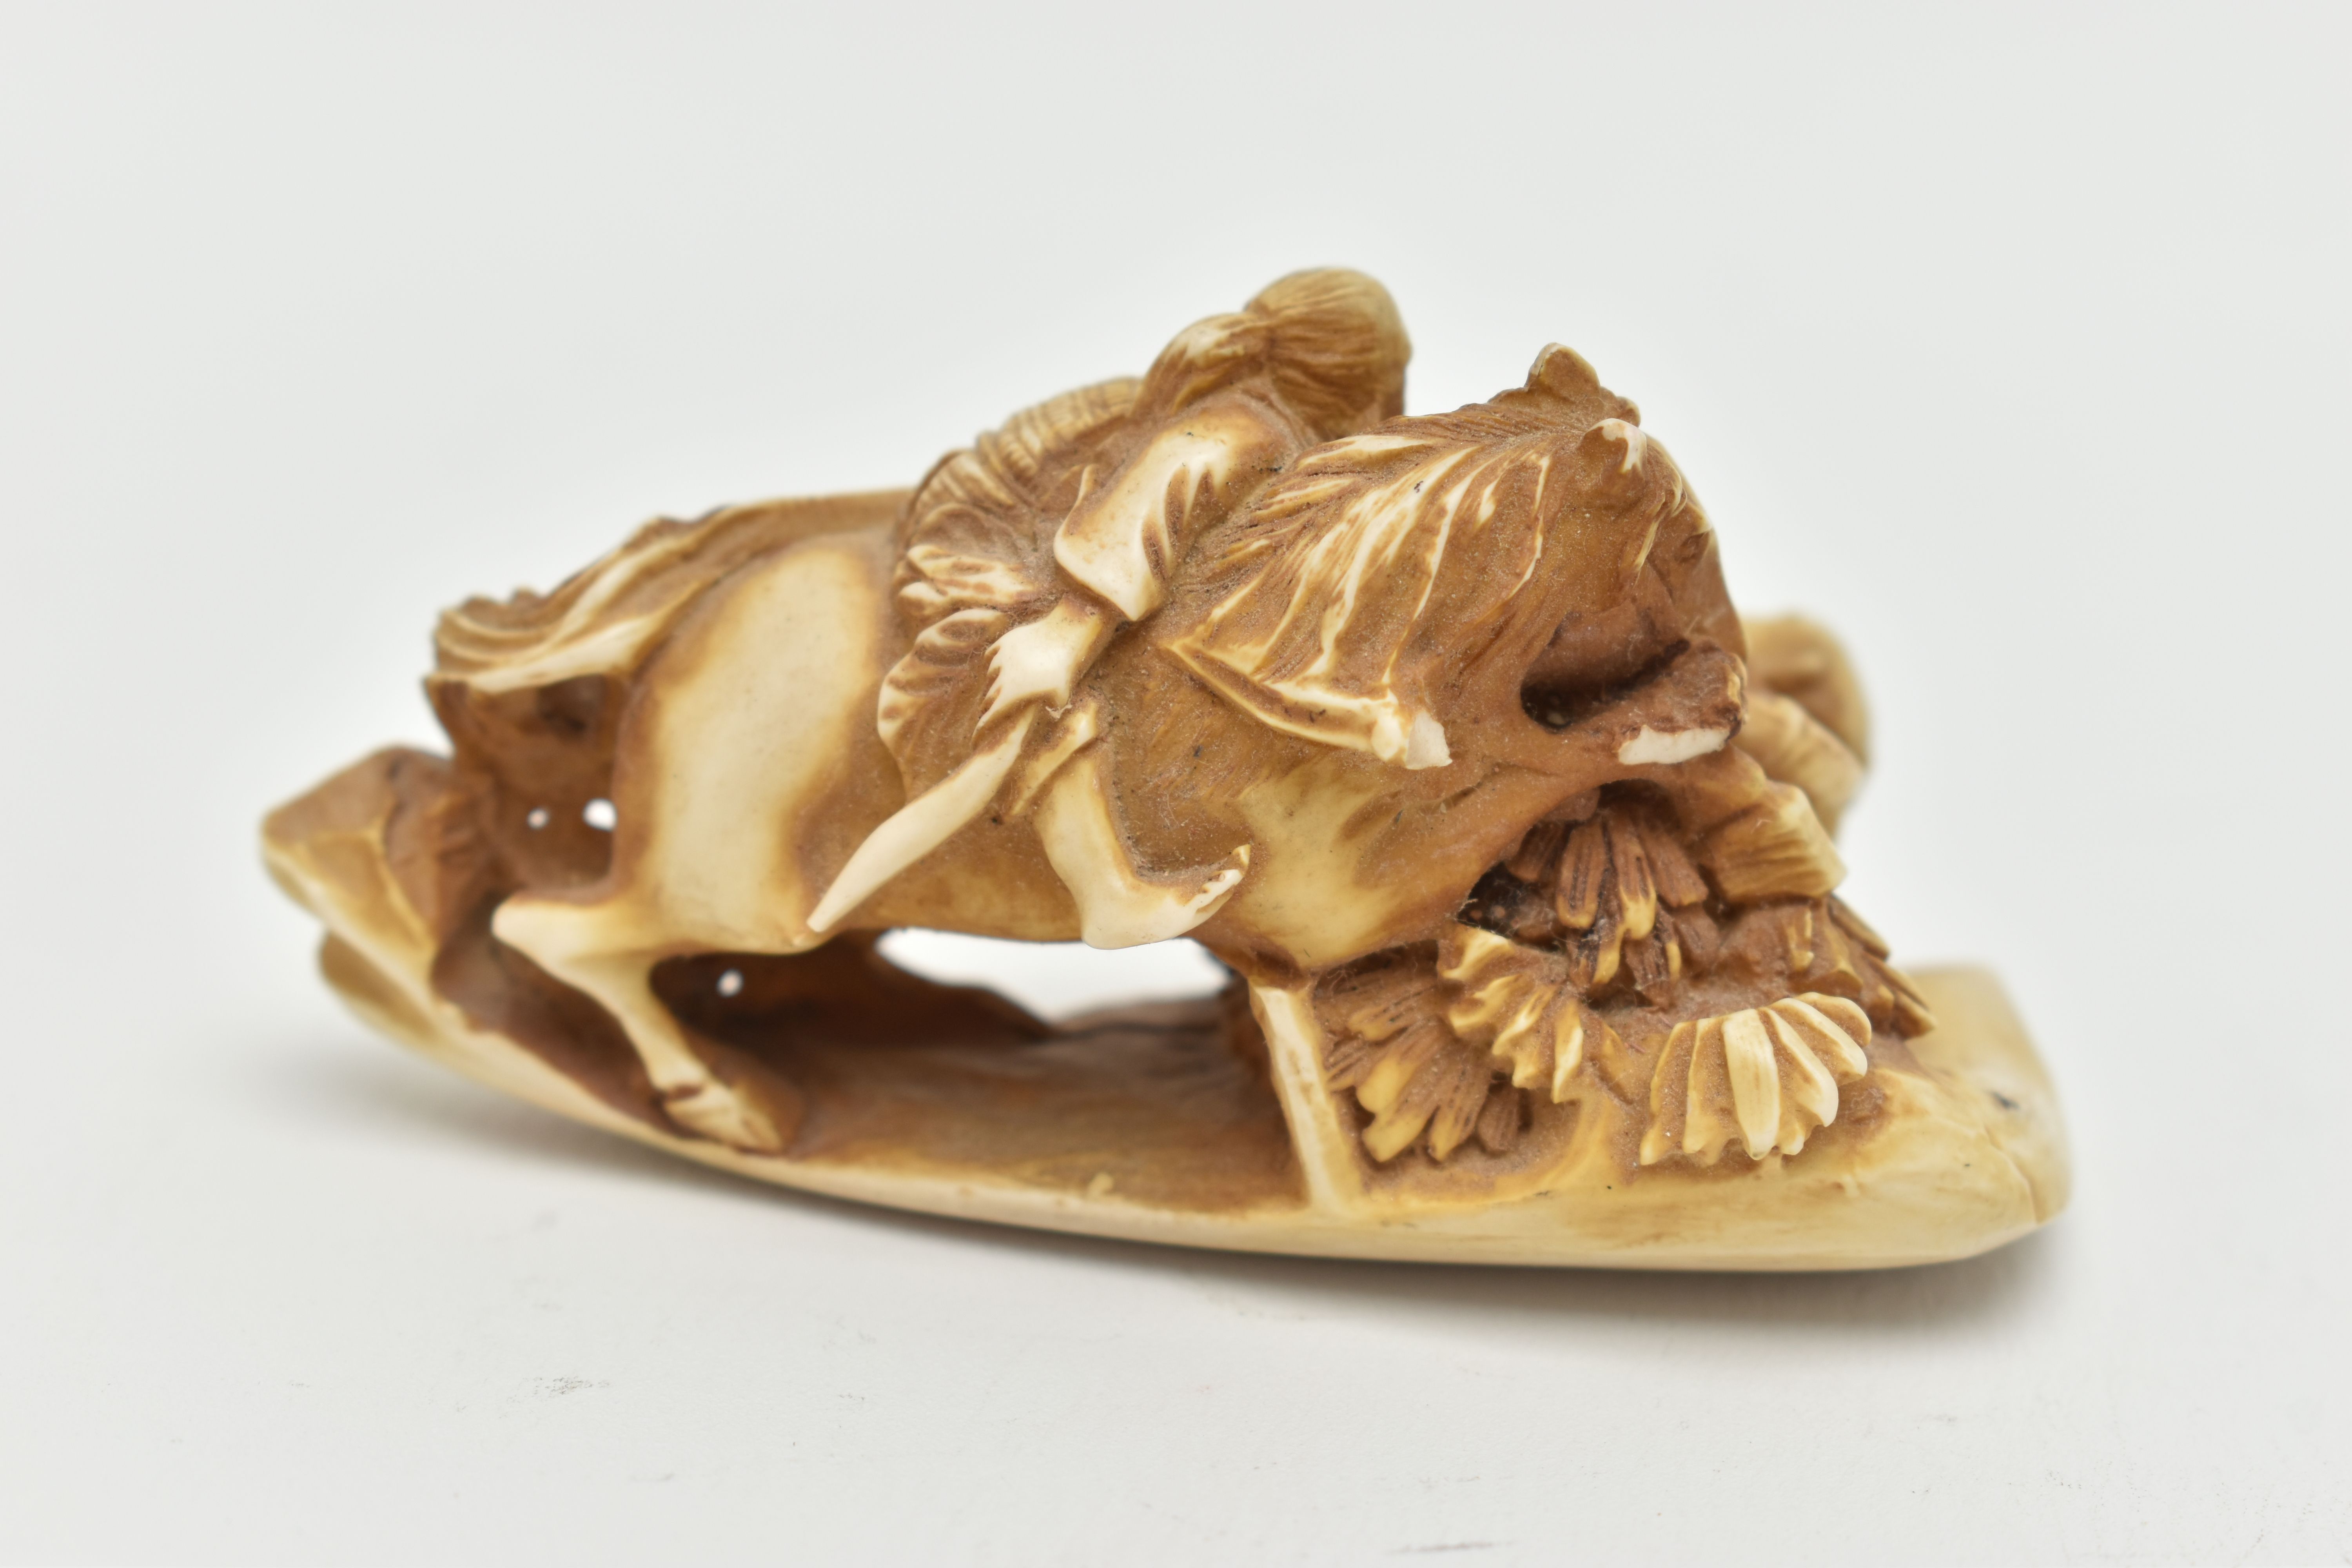 A BONE OKIMONO, a carved ornament depicting a man on a horse over a fallen down man, approximate - Image 3 of 7